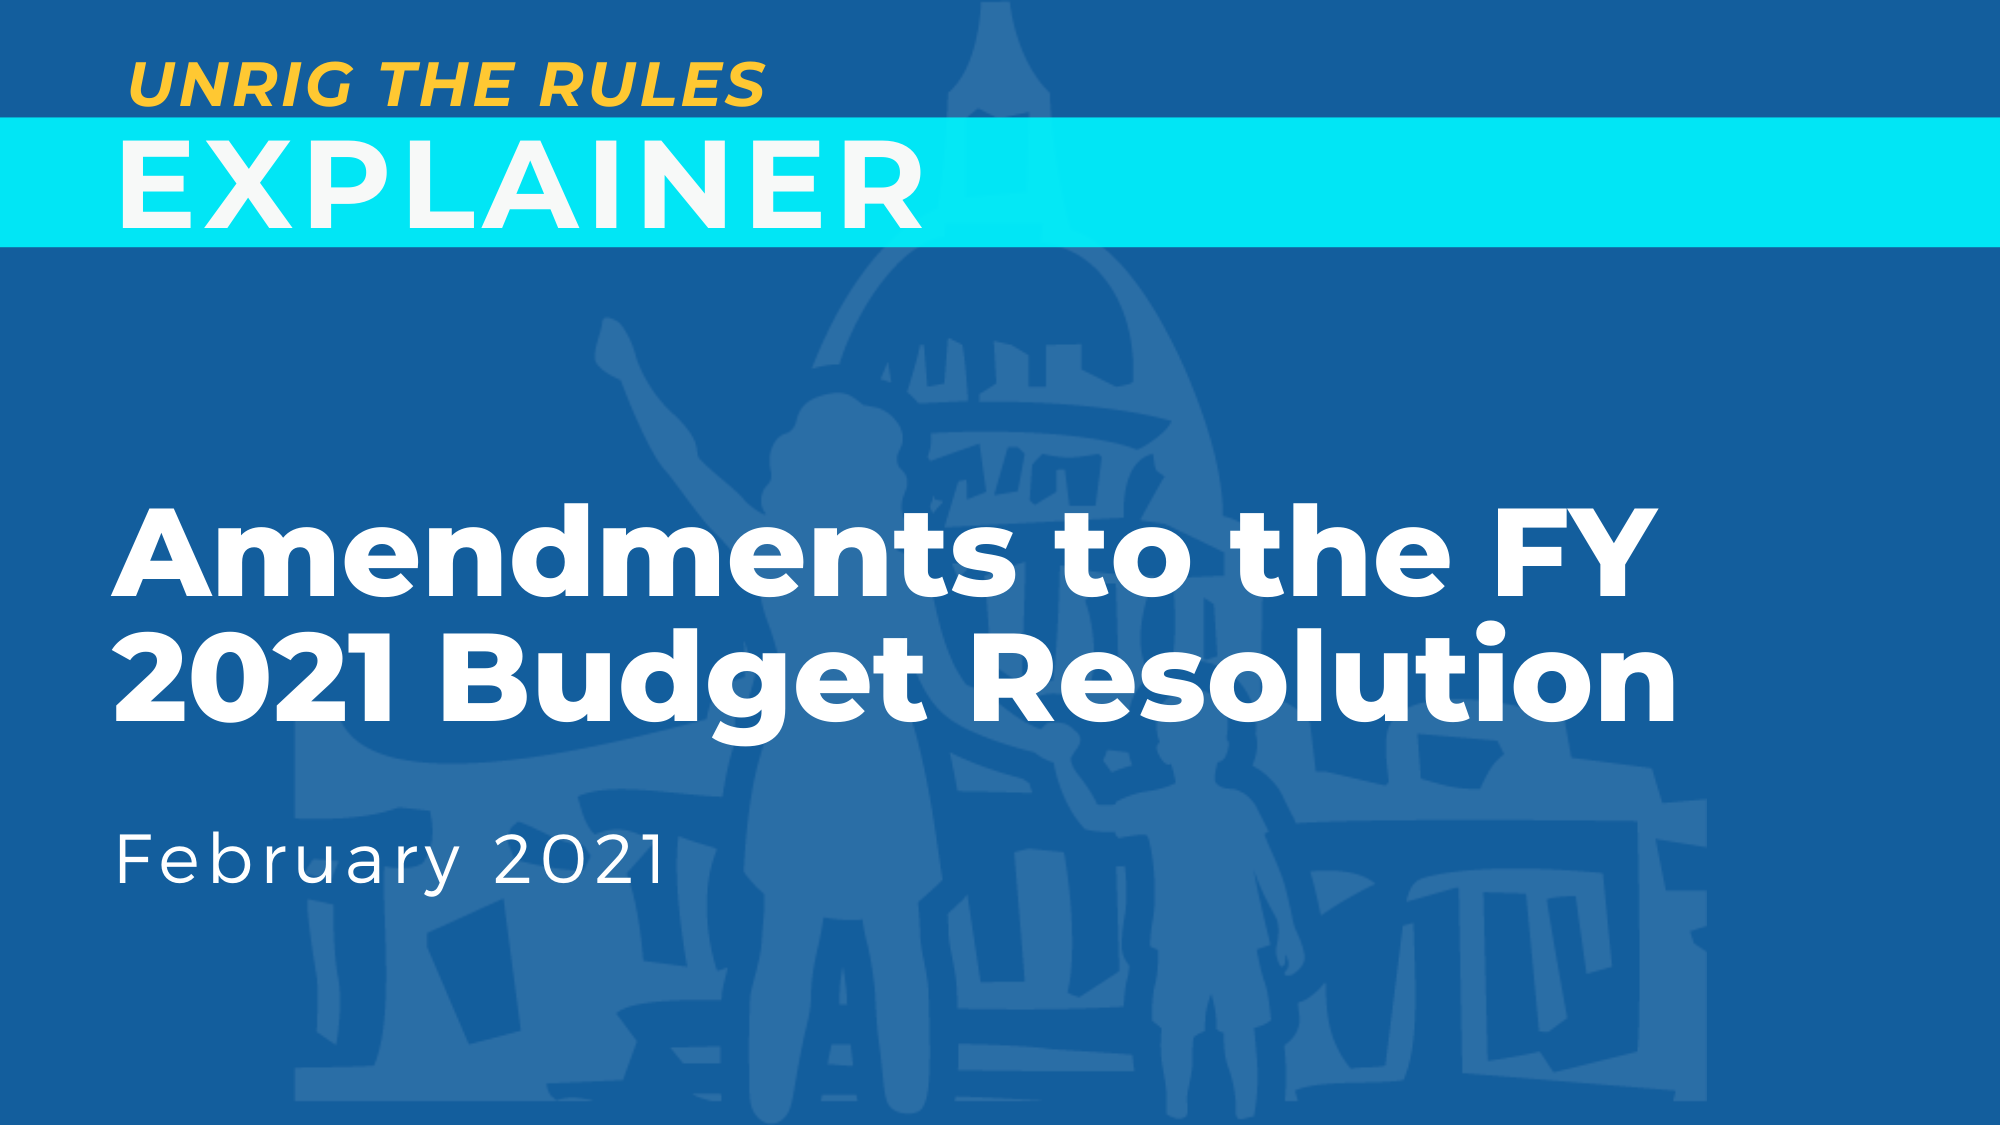 Amendments to the FY 2021 Budget Resolution